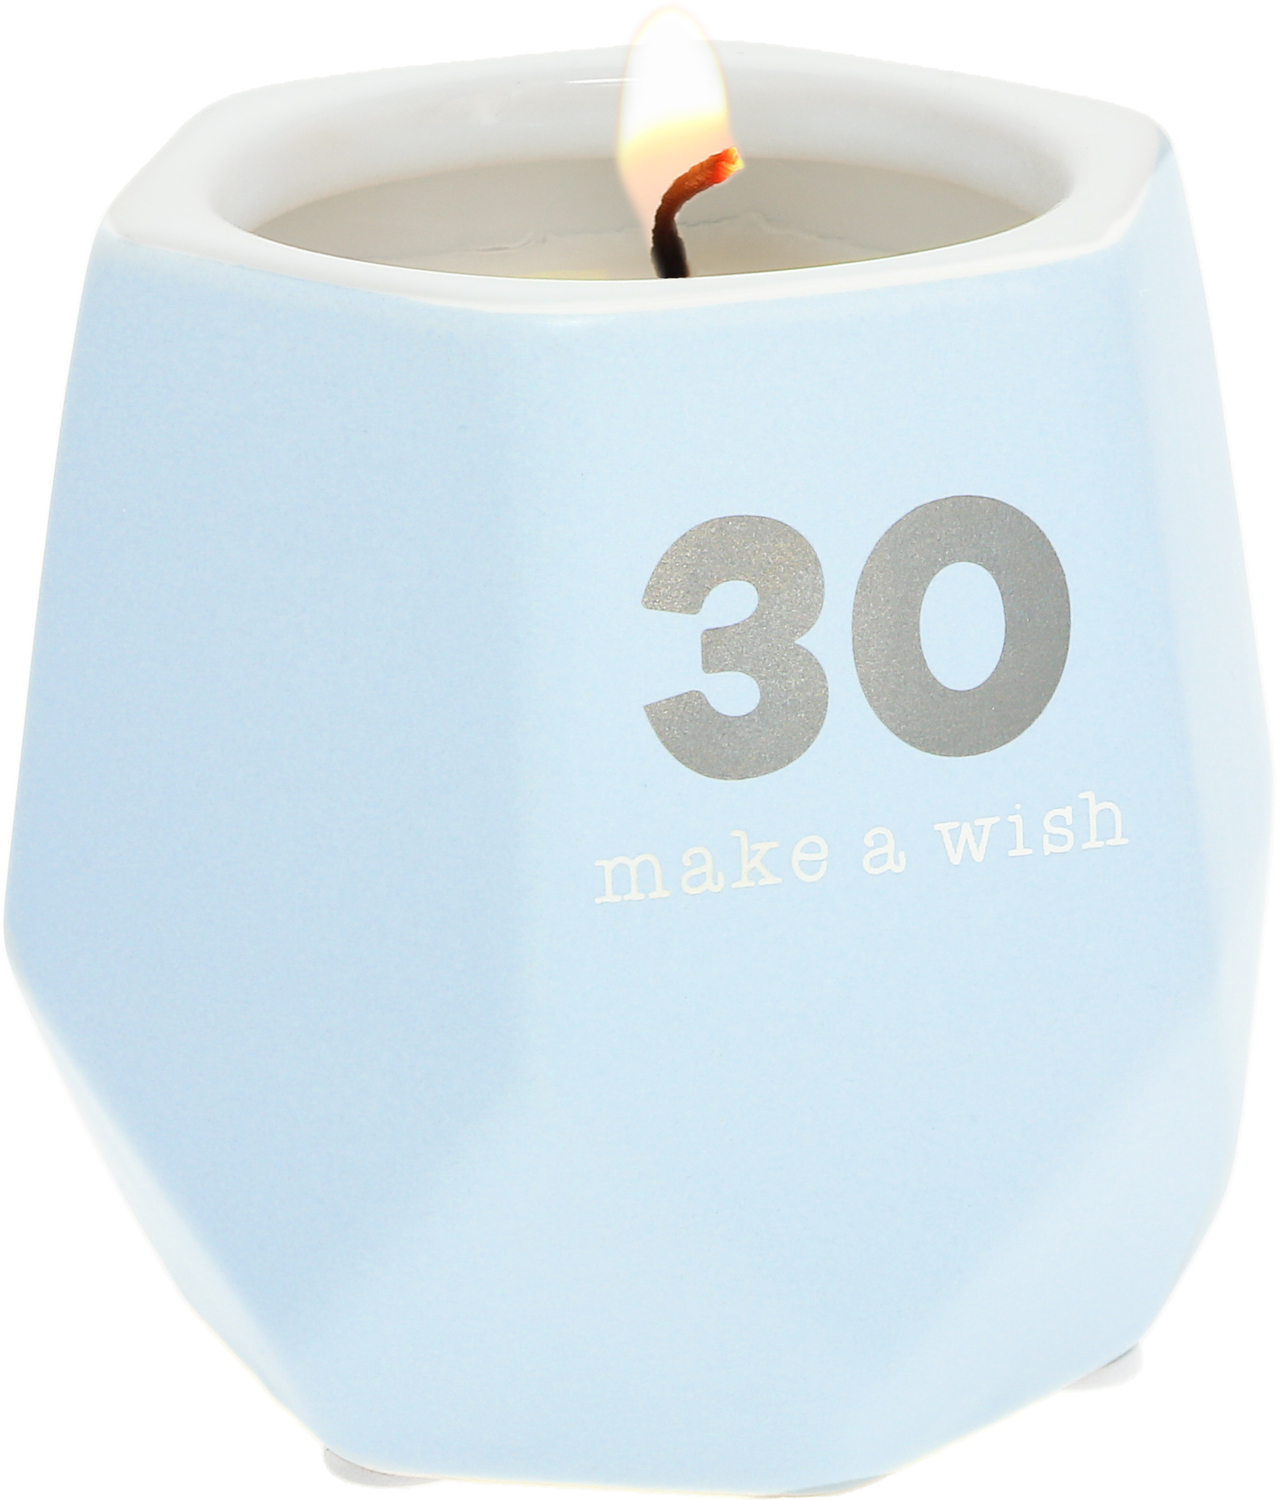 30 by Happy Confetti to You - 30 - 8 oz - 100% Soy Wax Candle
Scent: Tranquility